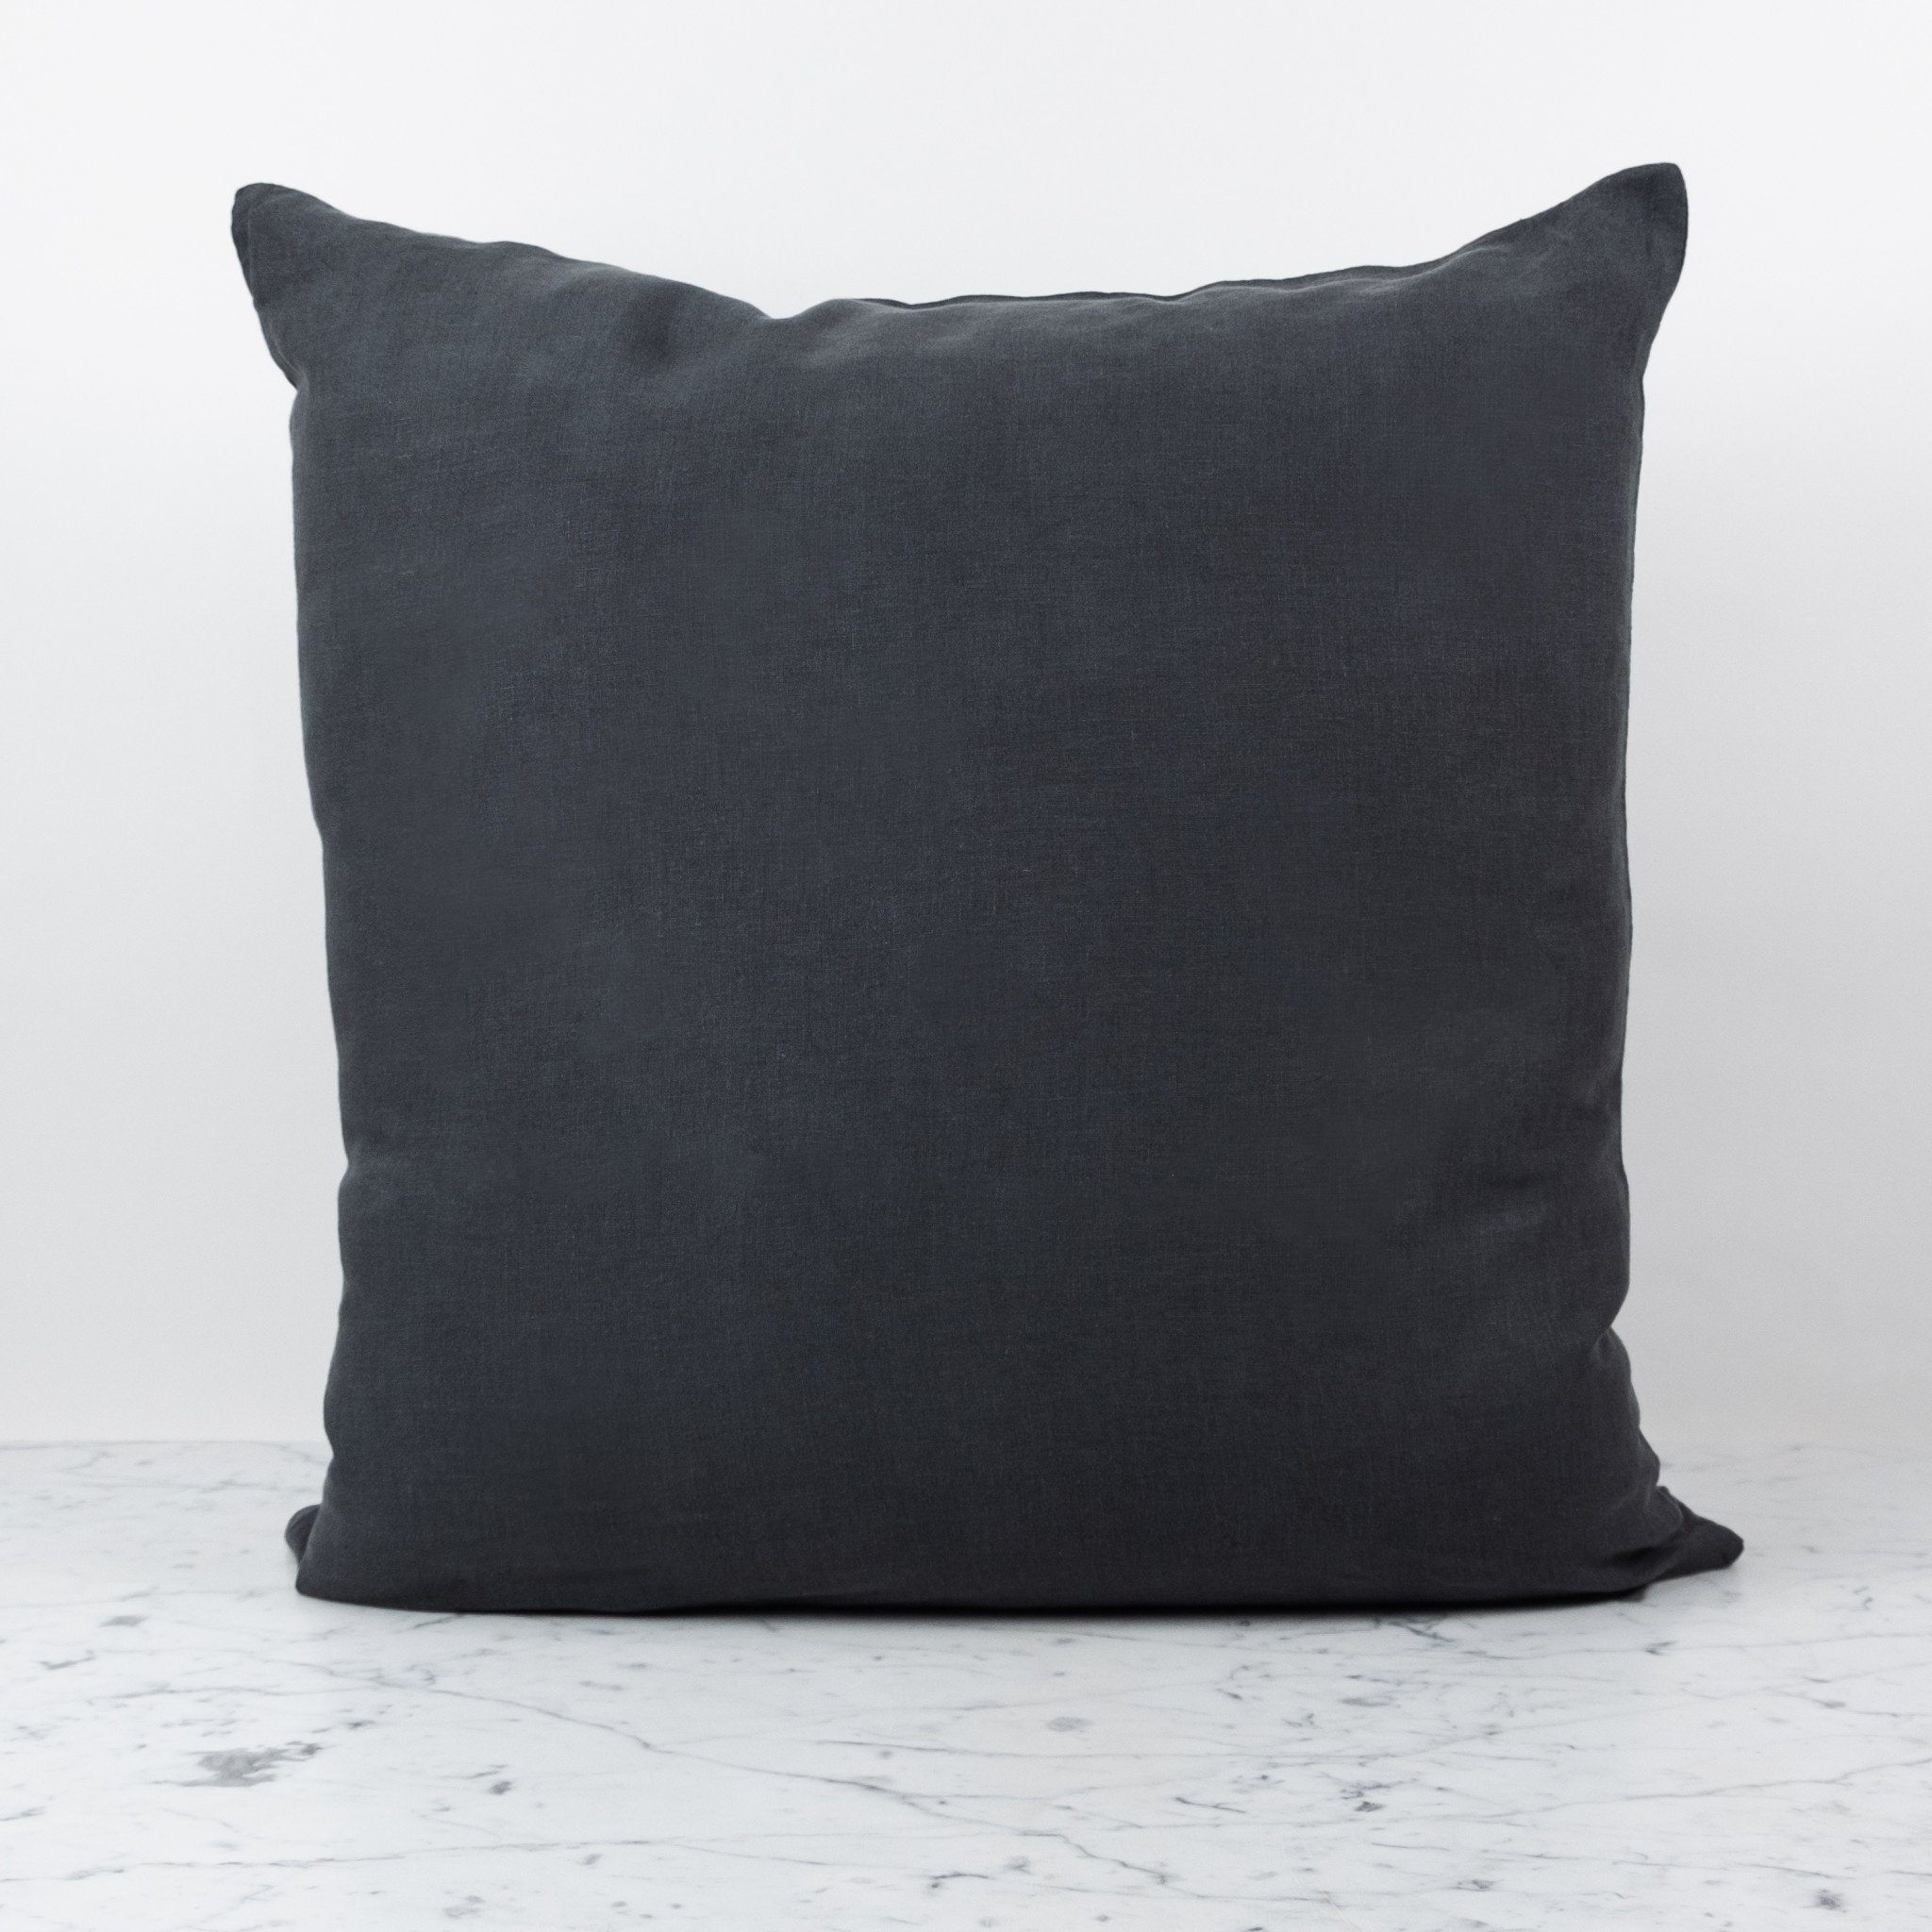 Linge Particulier French Linen Pillow Cover - 20" - Storm Grey